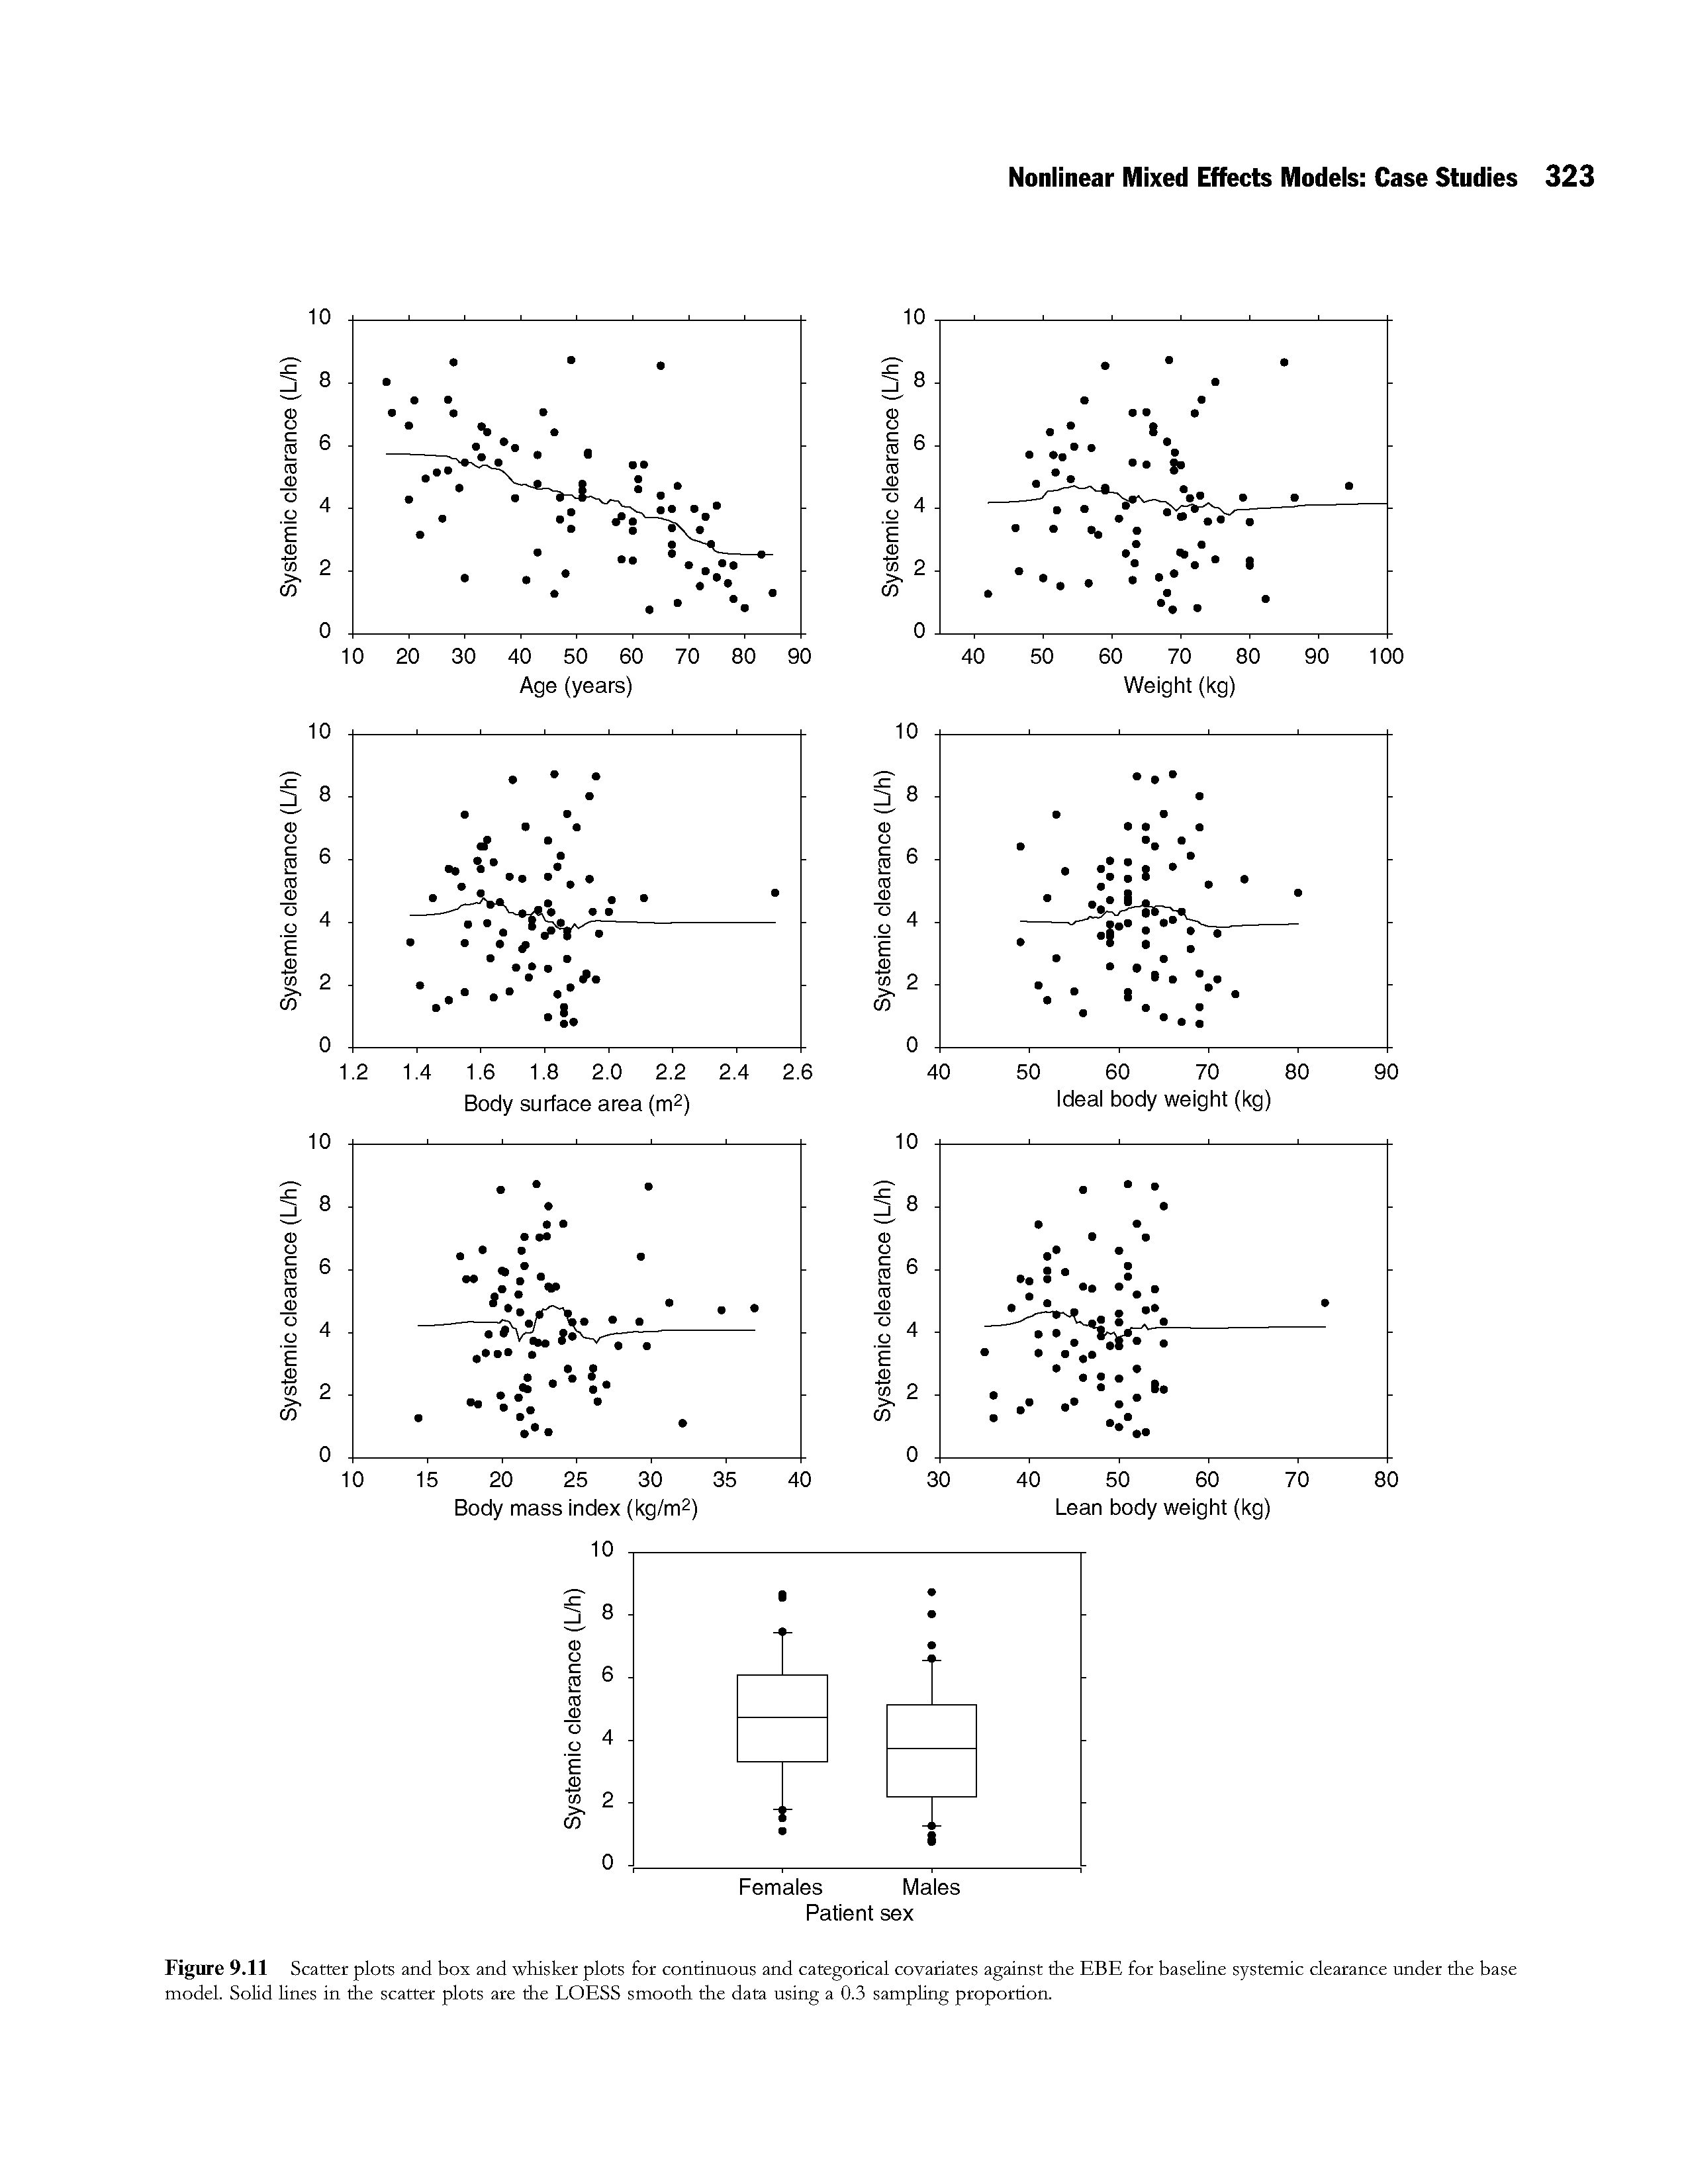 Figure 9.11 Scatter plots and box and whisker plots for continuous and categorical covariates against the EBE for baseline systemic clearance under the base model. Solid lines in the scatter plots are the LOESS smooth the data using a 0.3 sampling proportion.